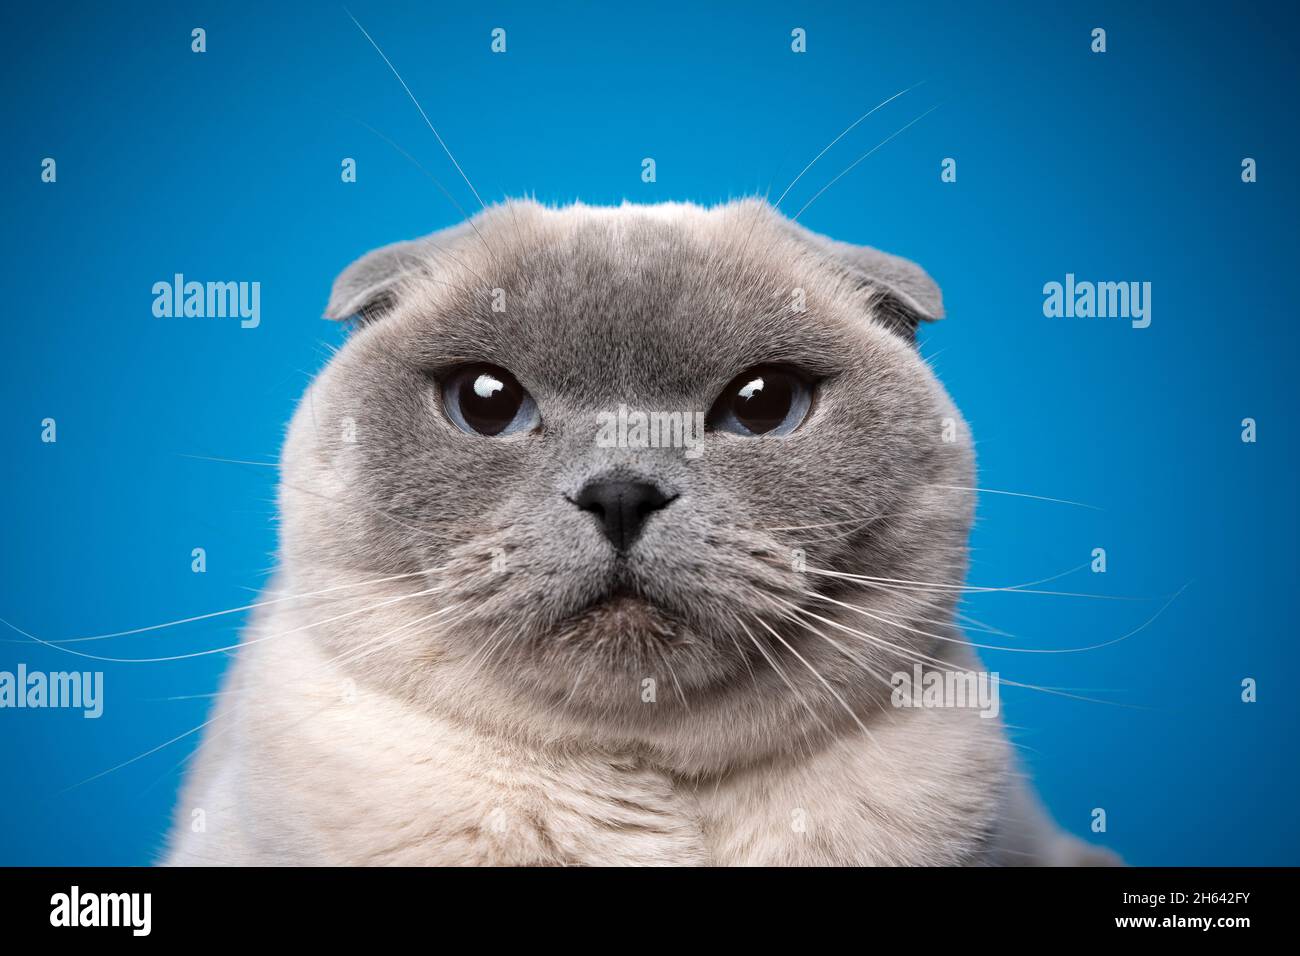 funny close up portrait of a blue point scottish fold cat looking at camera on blue background Stock Photo